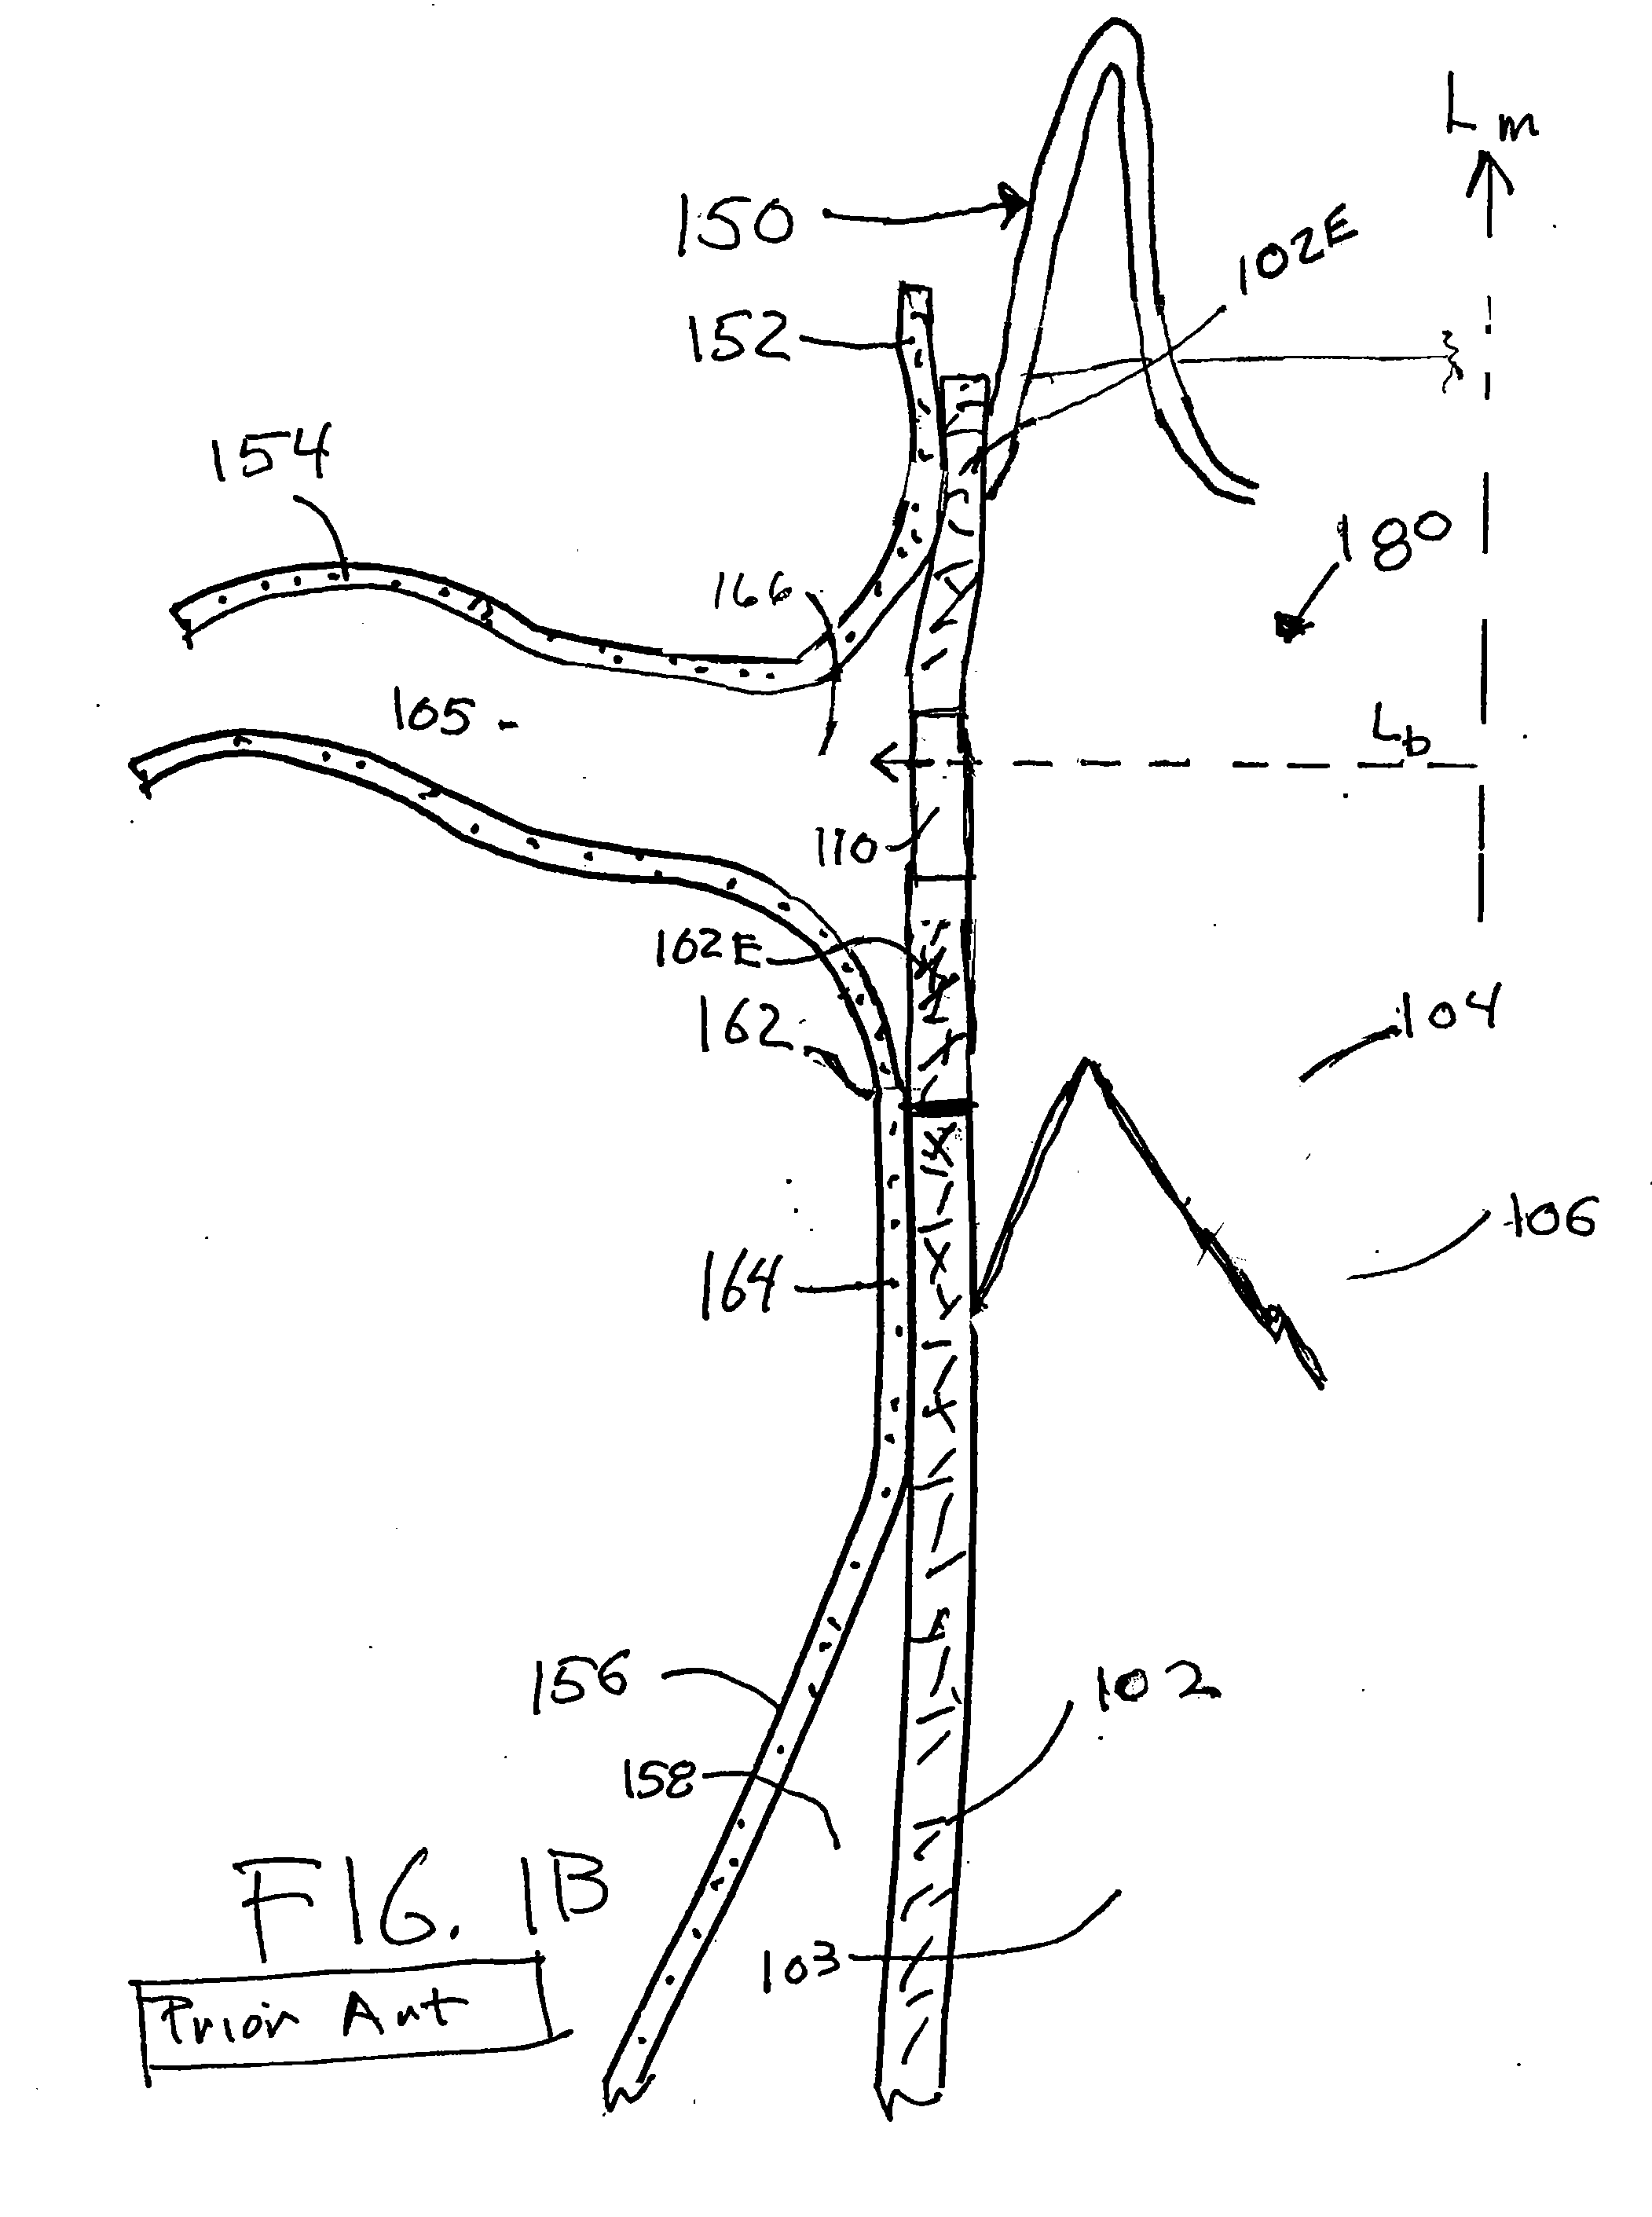 Stent Graft Having a Flexible, Articulable, and Axially Compressible Branch Graft